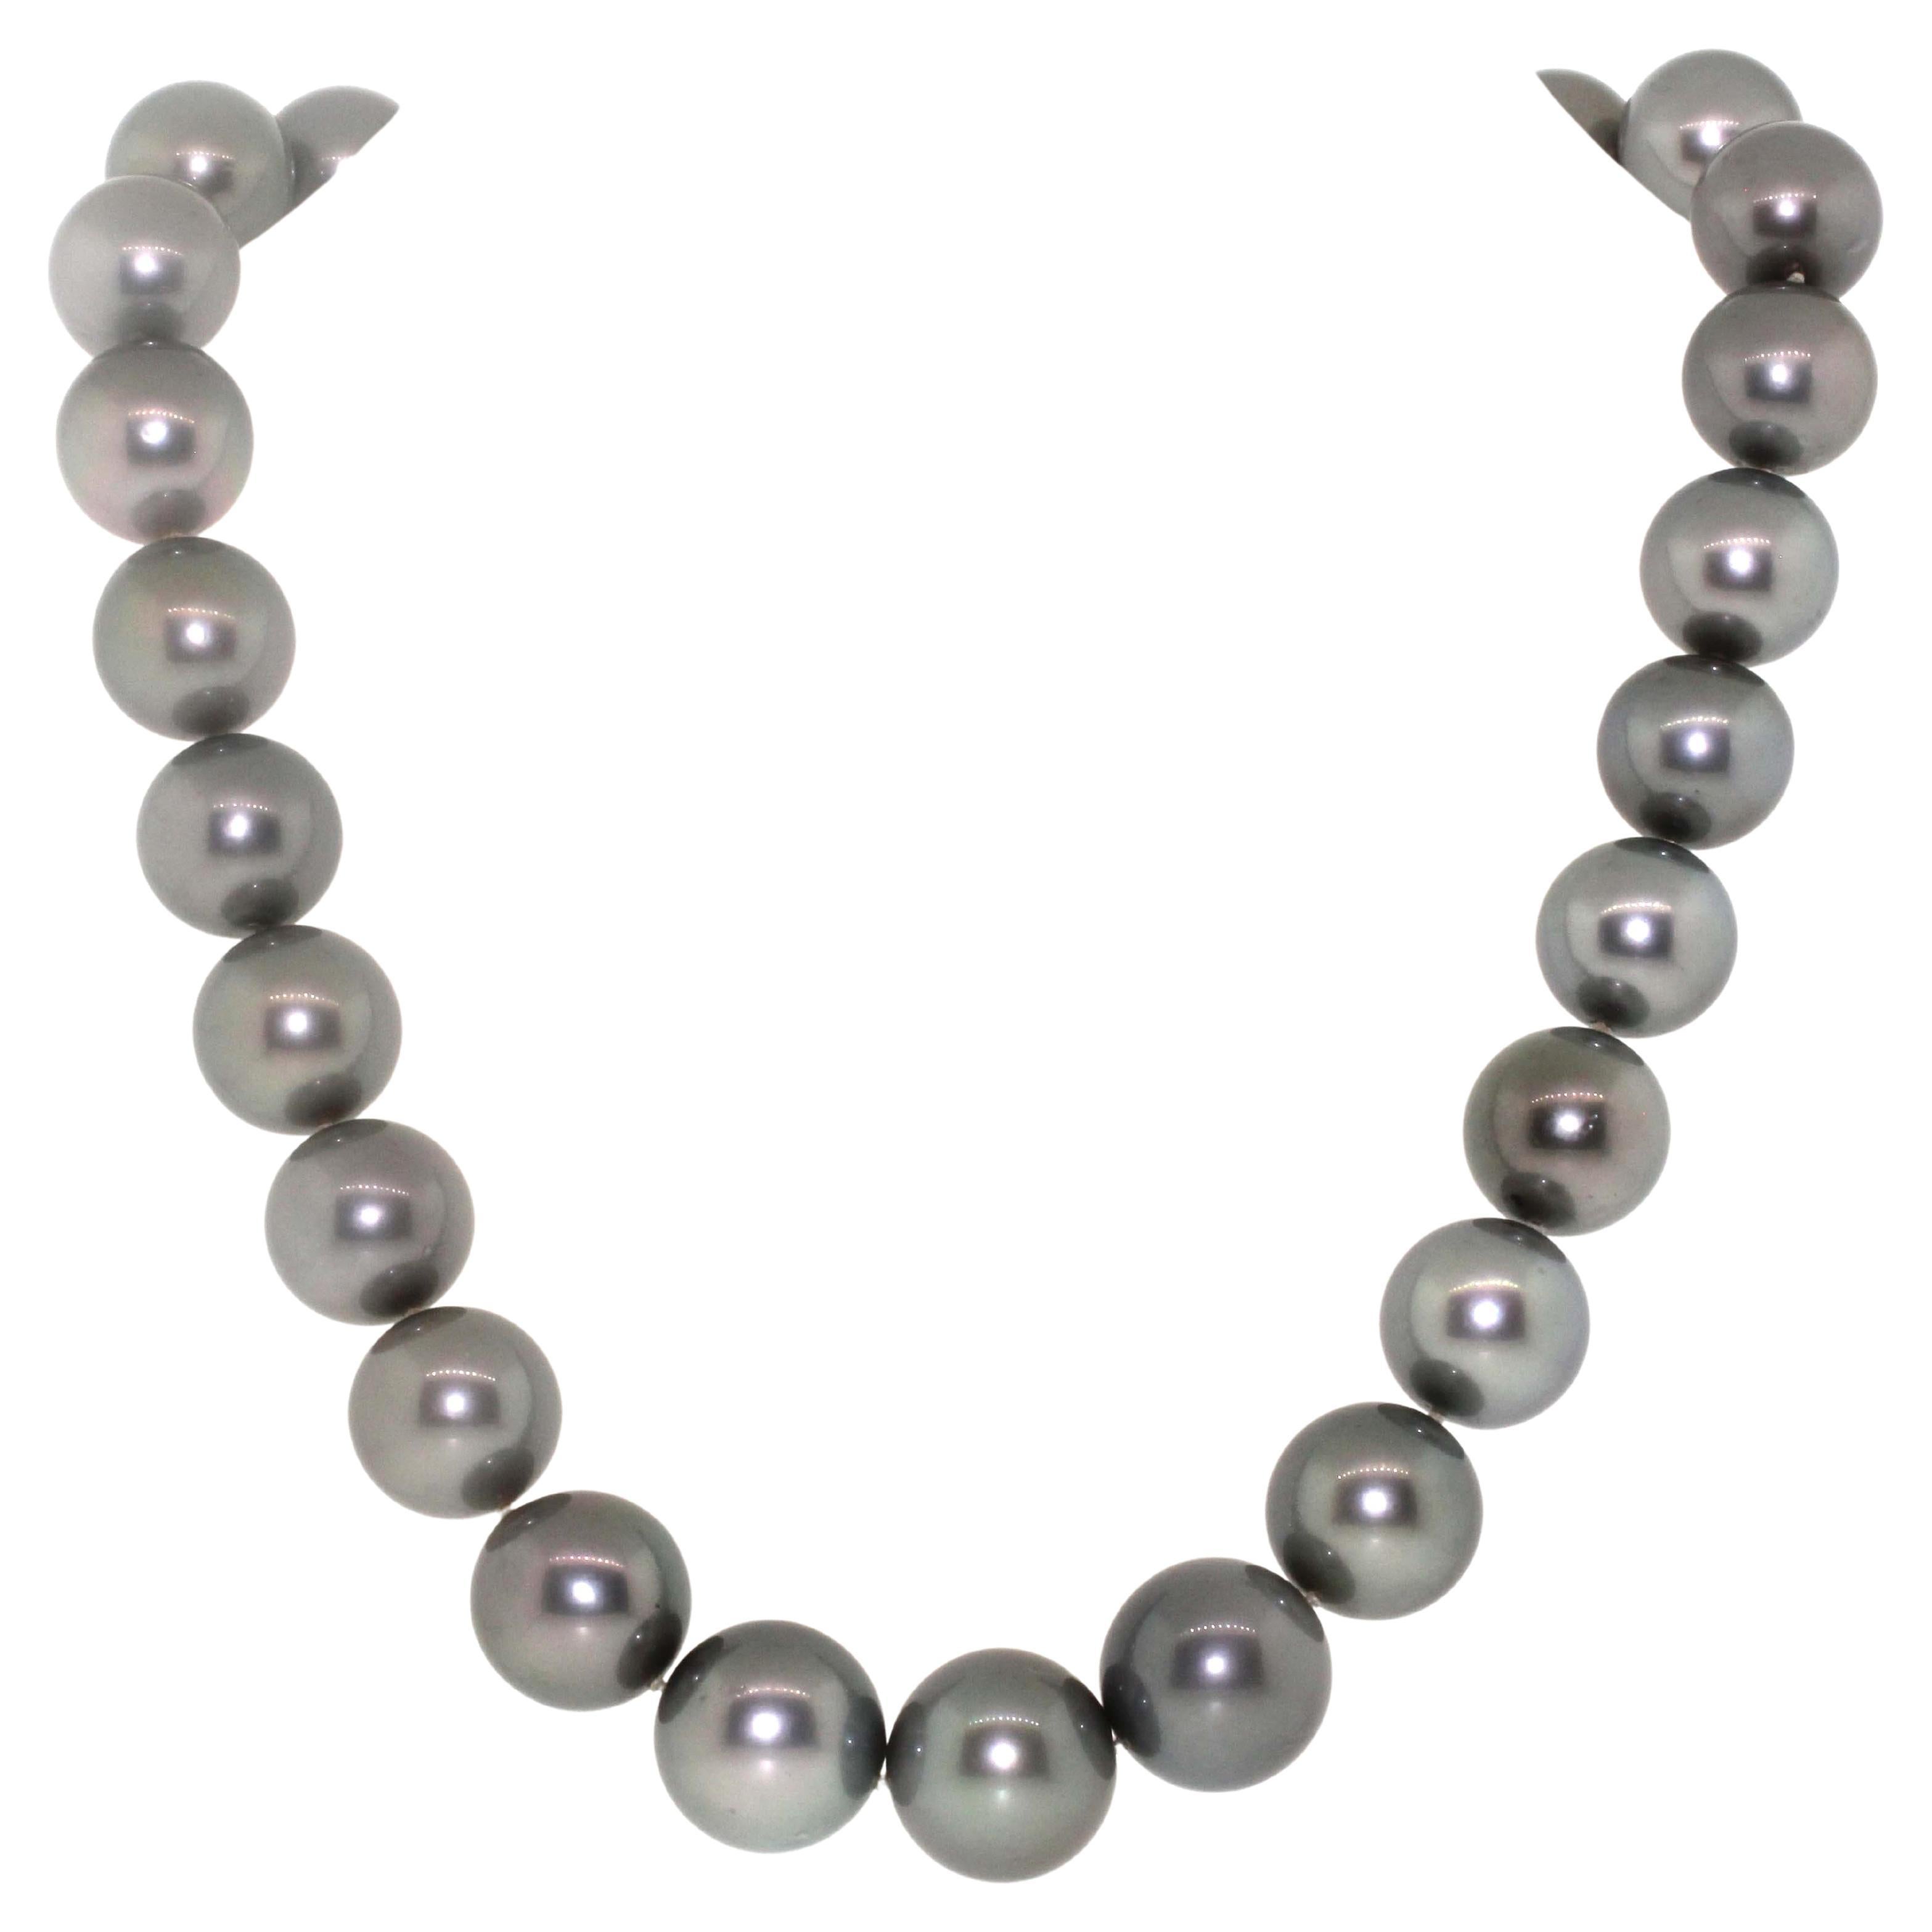 Hakimoto By Jewel Of Ocean 18K PEARL STRAND NECKLACE 
18K Yellow Gold  
Weight (g): 125
Cultured Tahitian South Sea Pearl 
Pearl Size: 16X14mm 
Pearl Shape: Round 
Body color: Silver Gray
Orient: Good
Luster: Good 
Surface: Clean
Nacre: